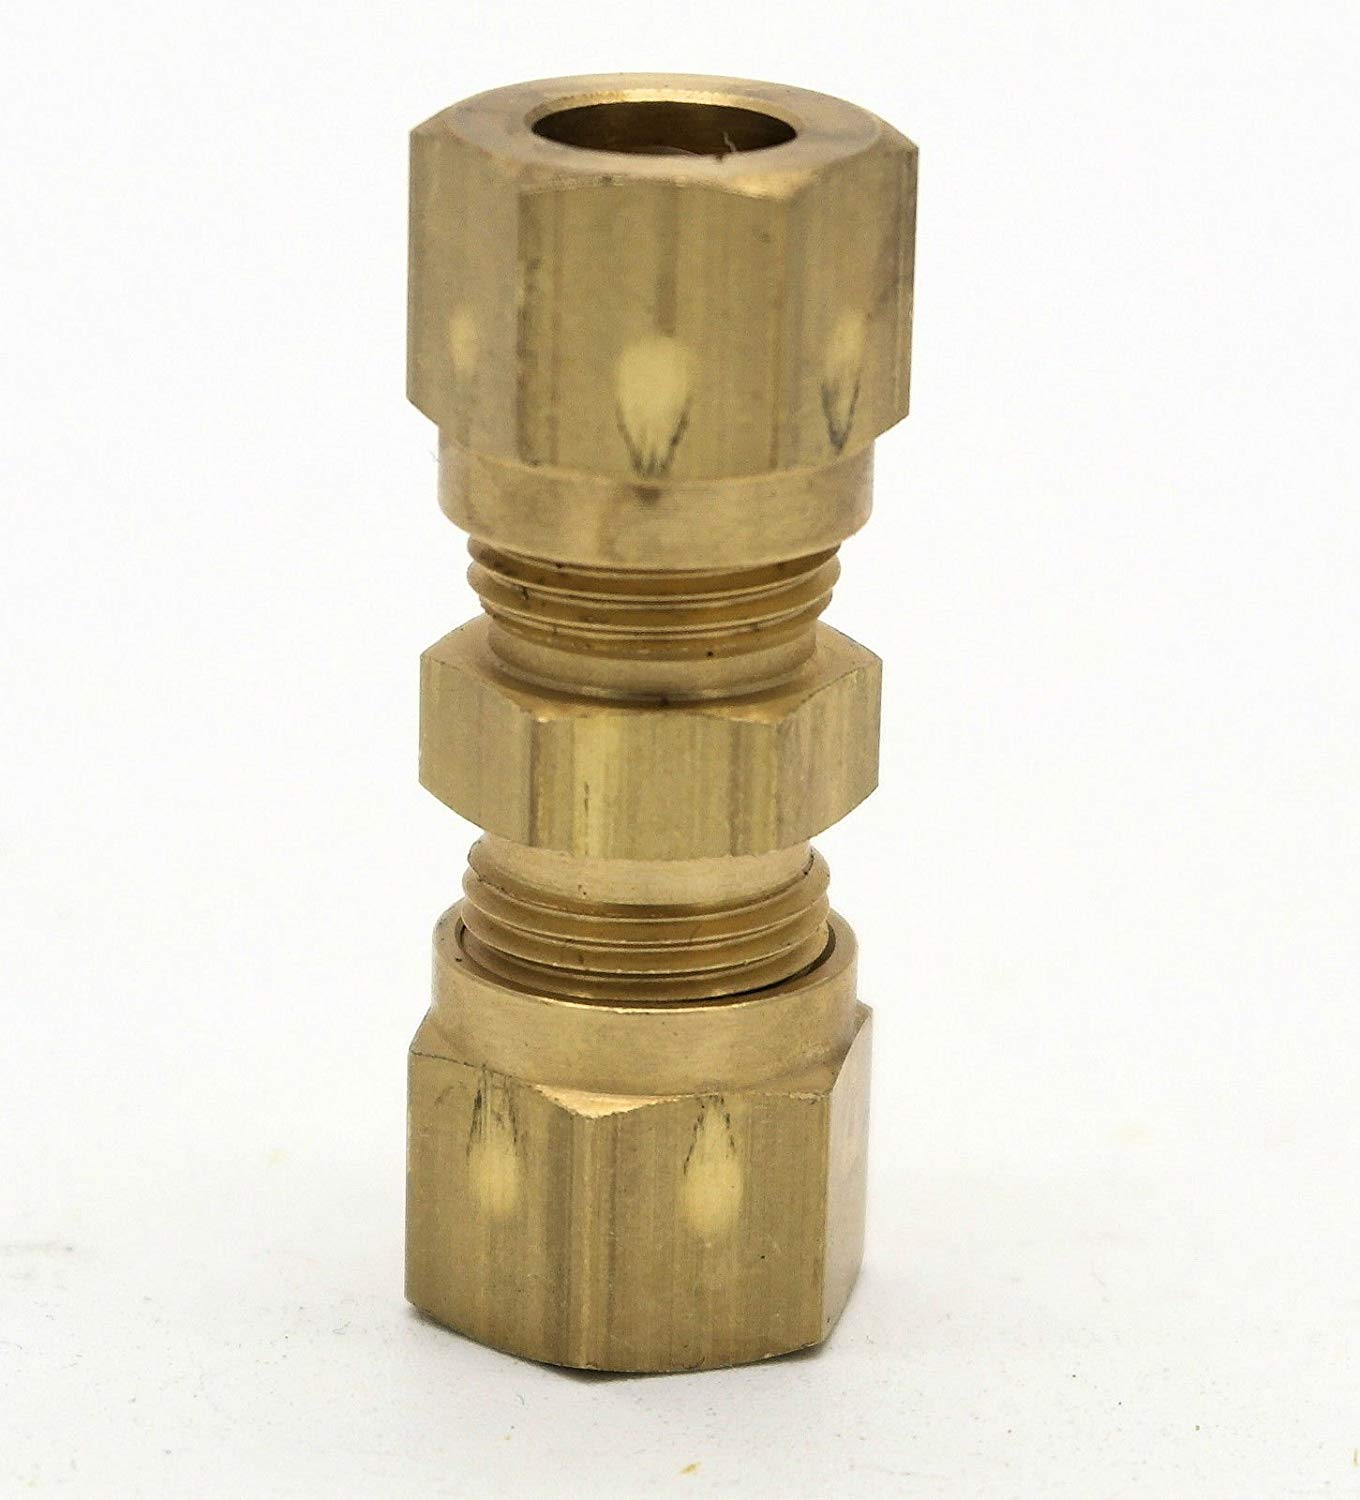 British Made 5/16 To 5/16 Brass Compression Fitting (16